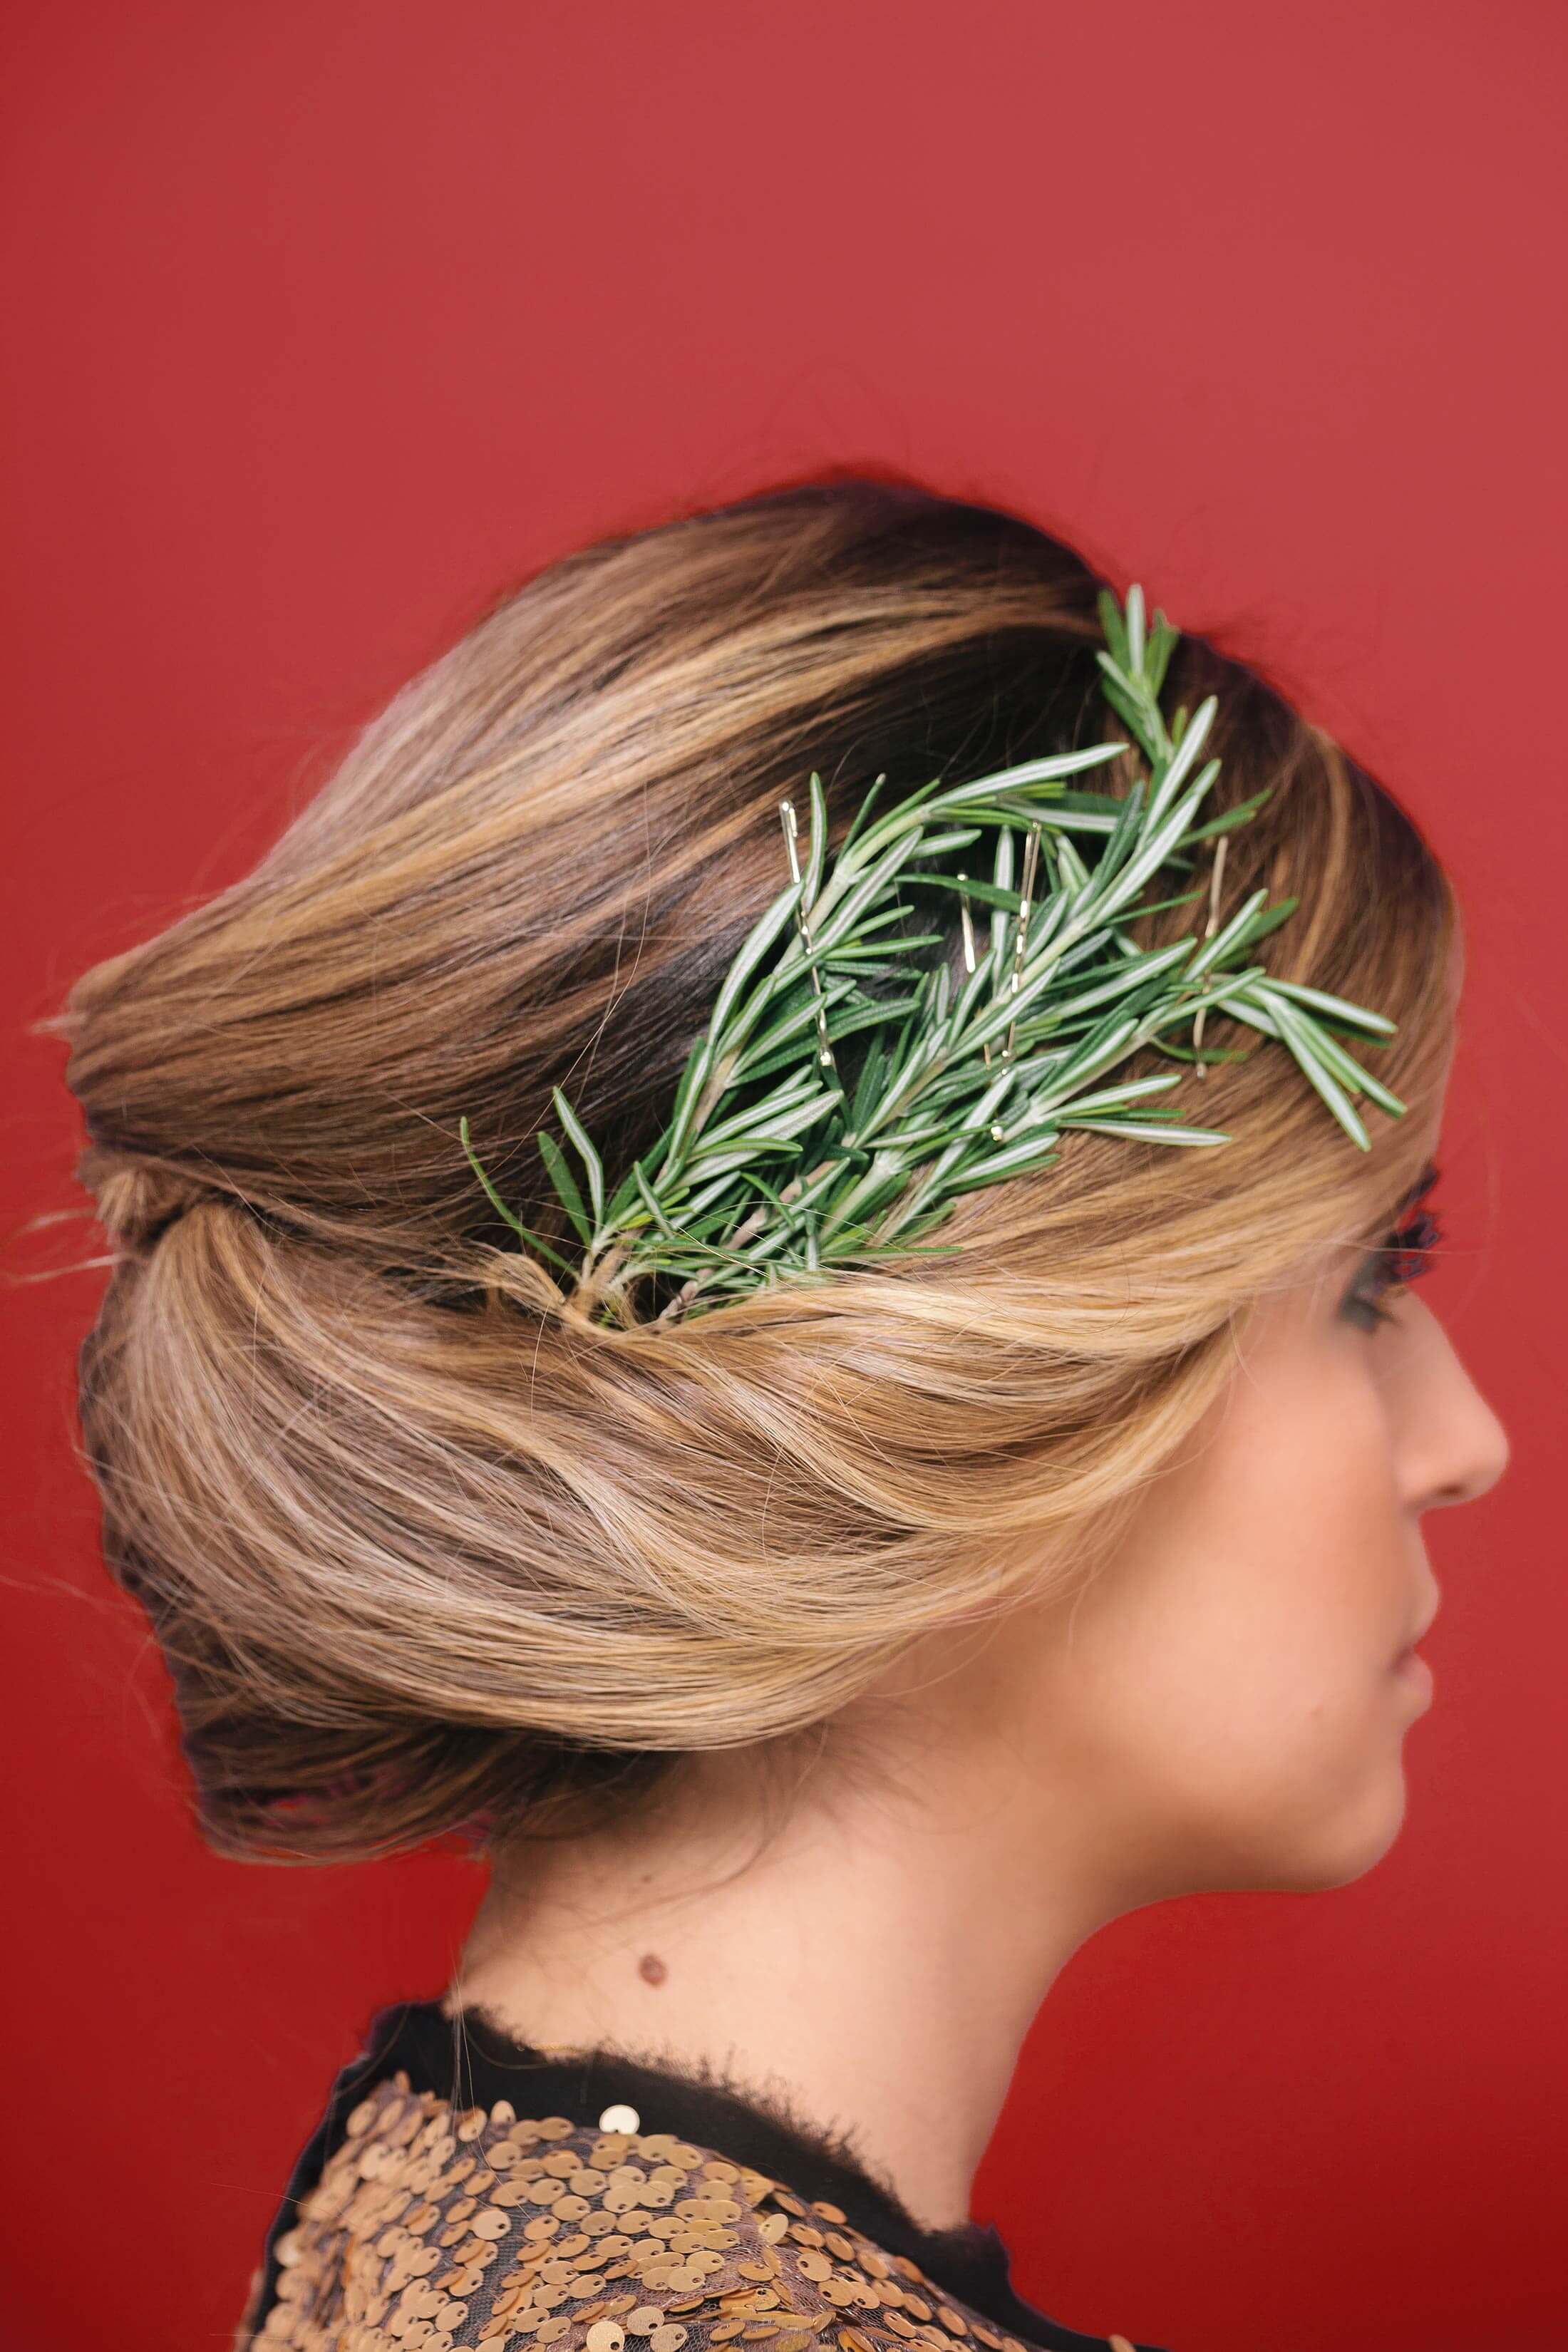 28 Stunning Christmas Hairstyles Don't Miss Out The Holiday Fun!